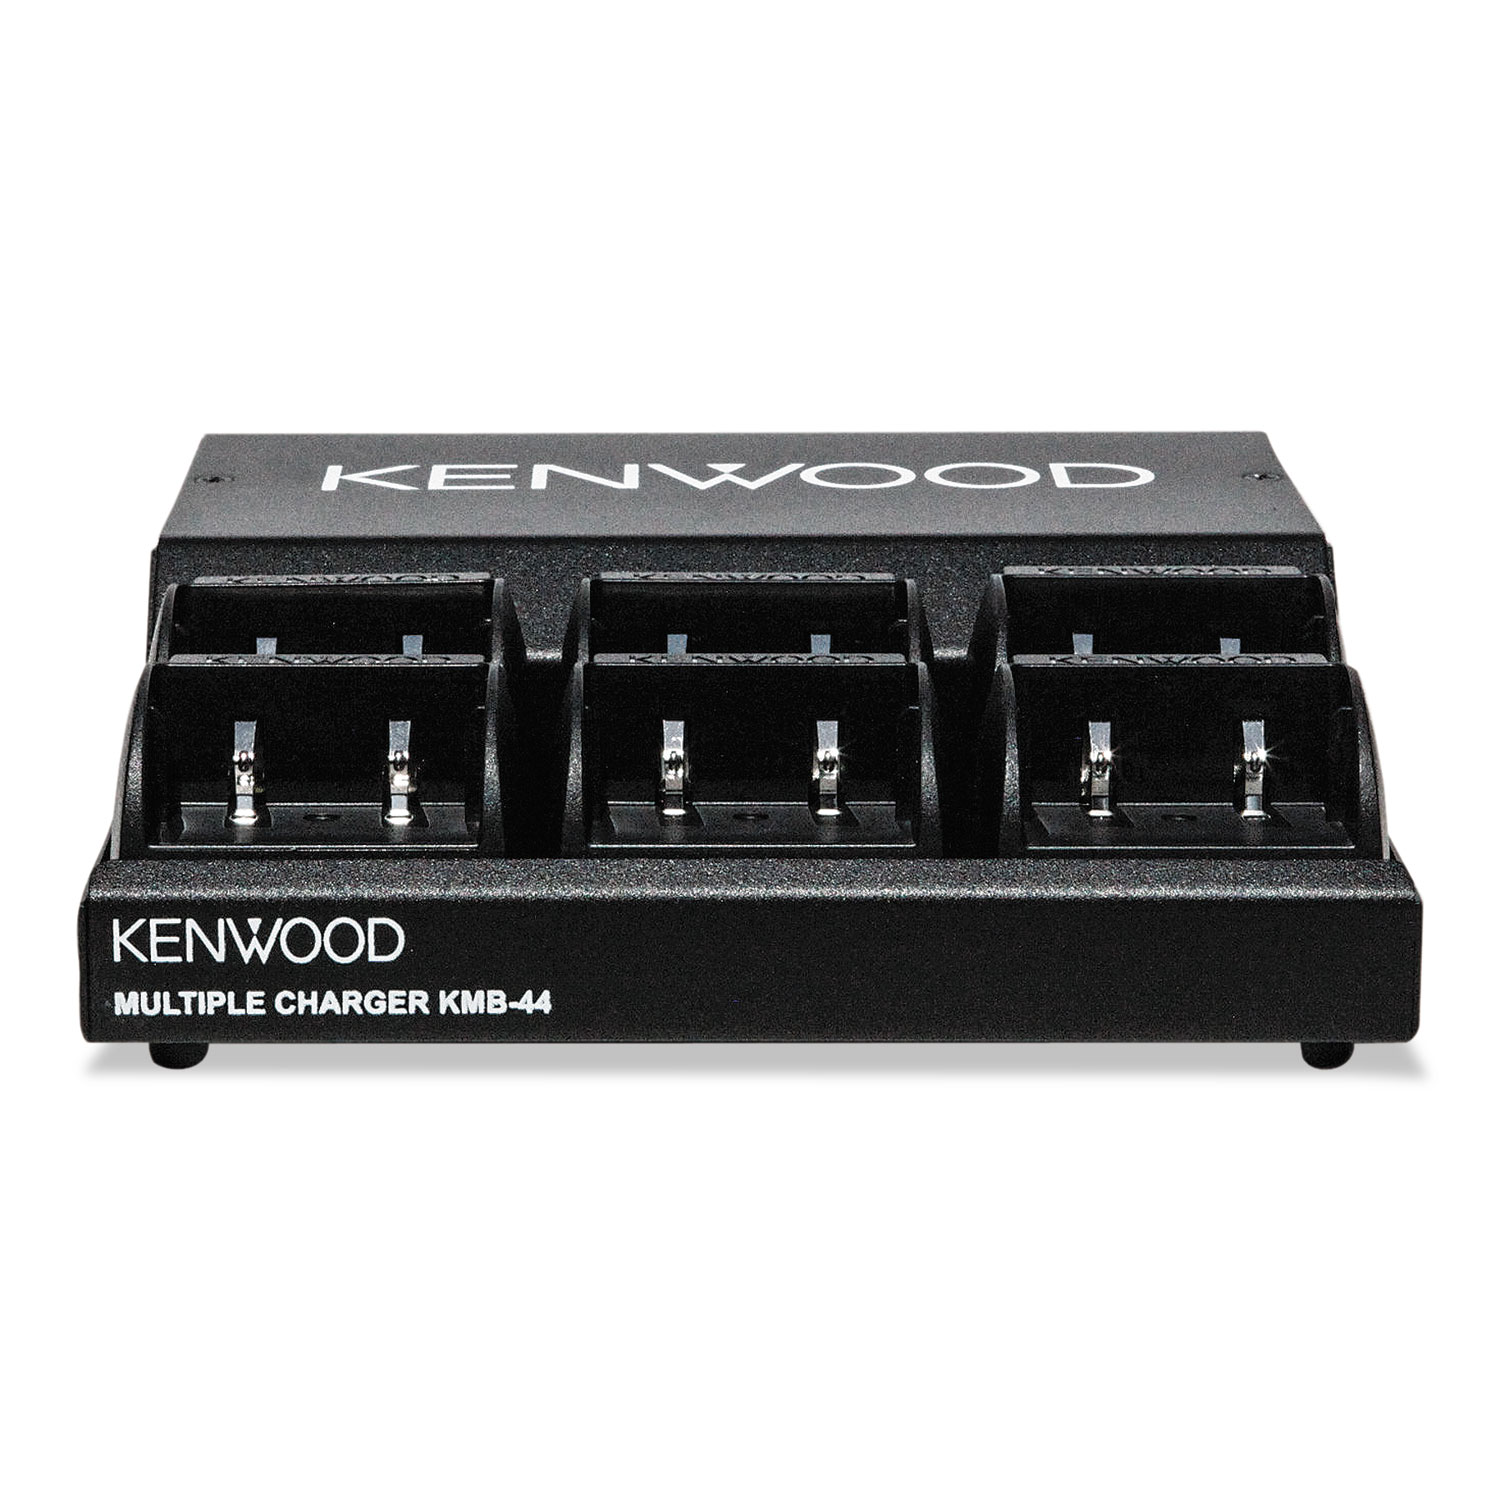 Six-Unit Charger for Kenwood PKT23K Two-Way Radios